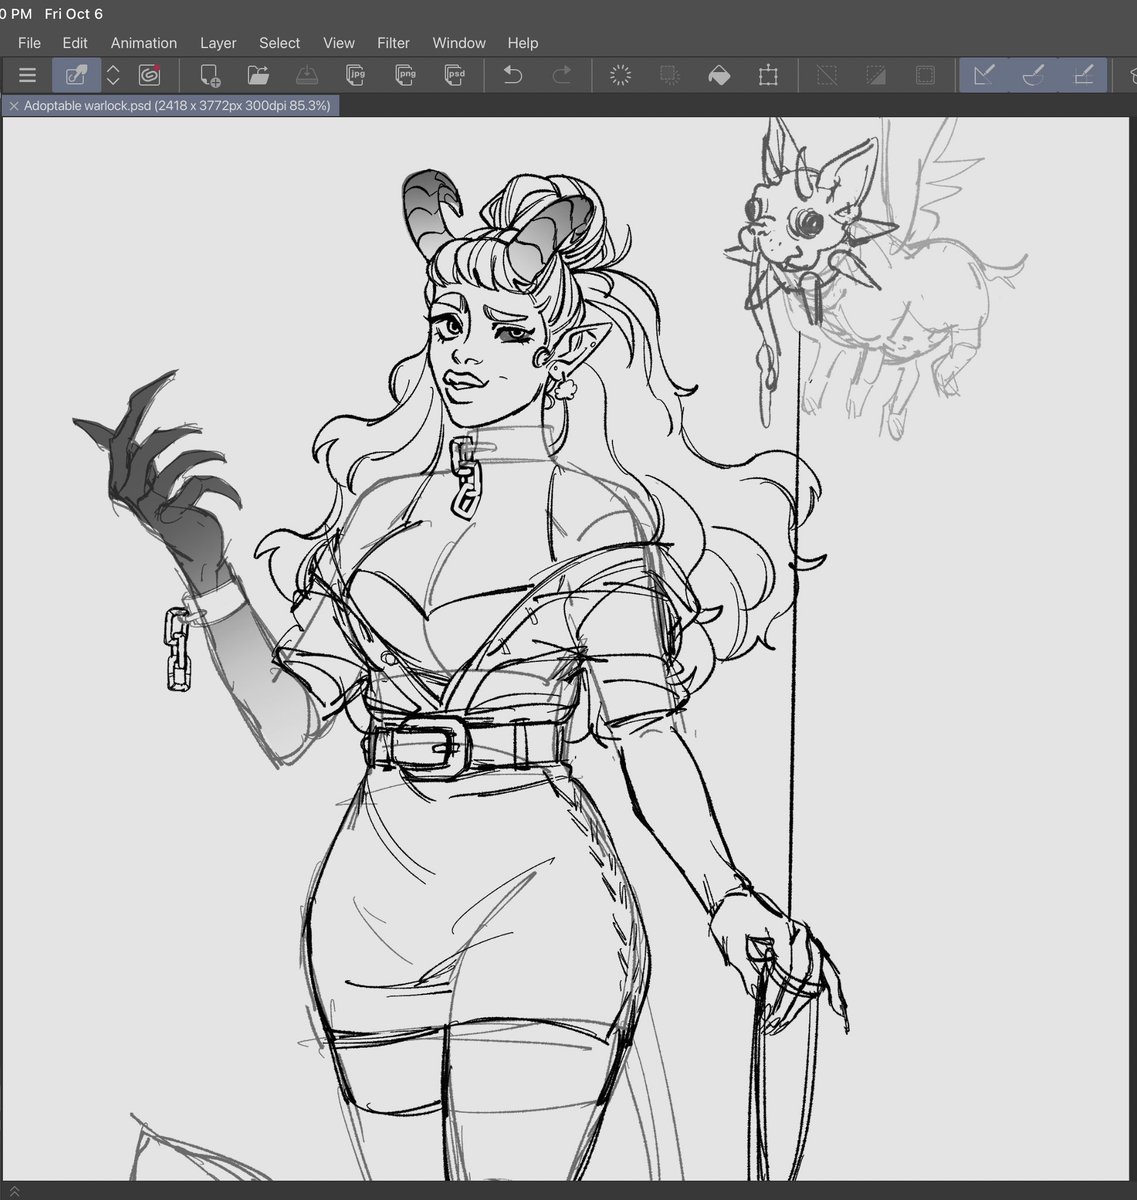 (WIP) Old n new- i never finished the older version(2022) bc i ended up hating it but im having fun with the design of the new one hopefully someone buys her or else she will be mine👿 gonna try to finish next week....